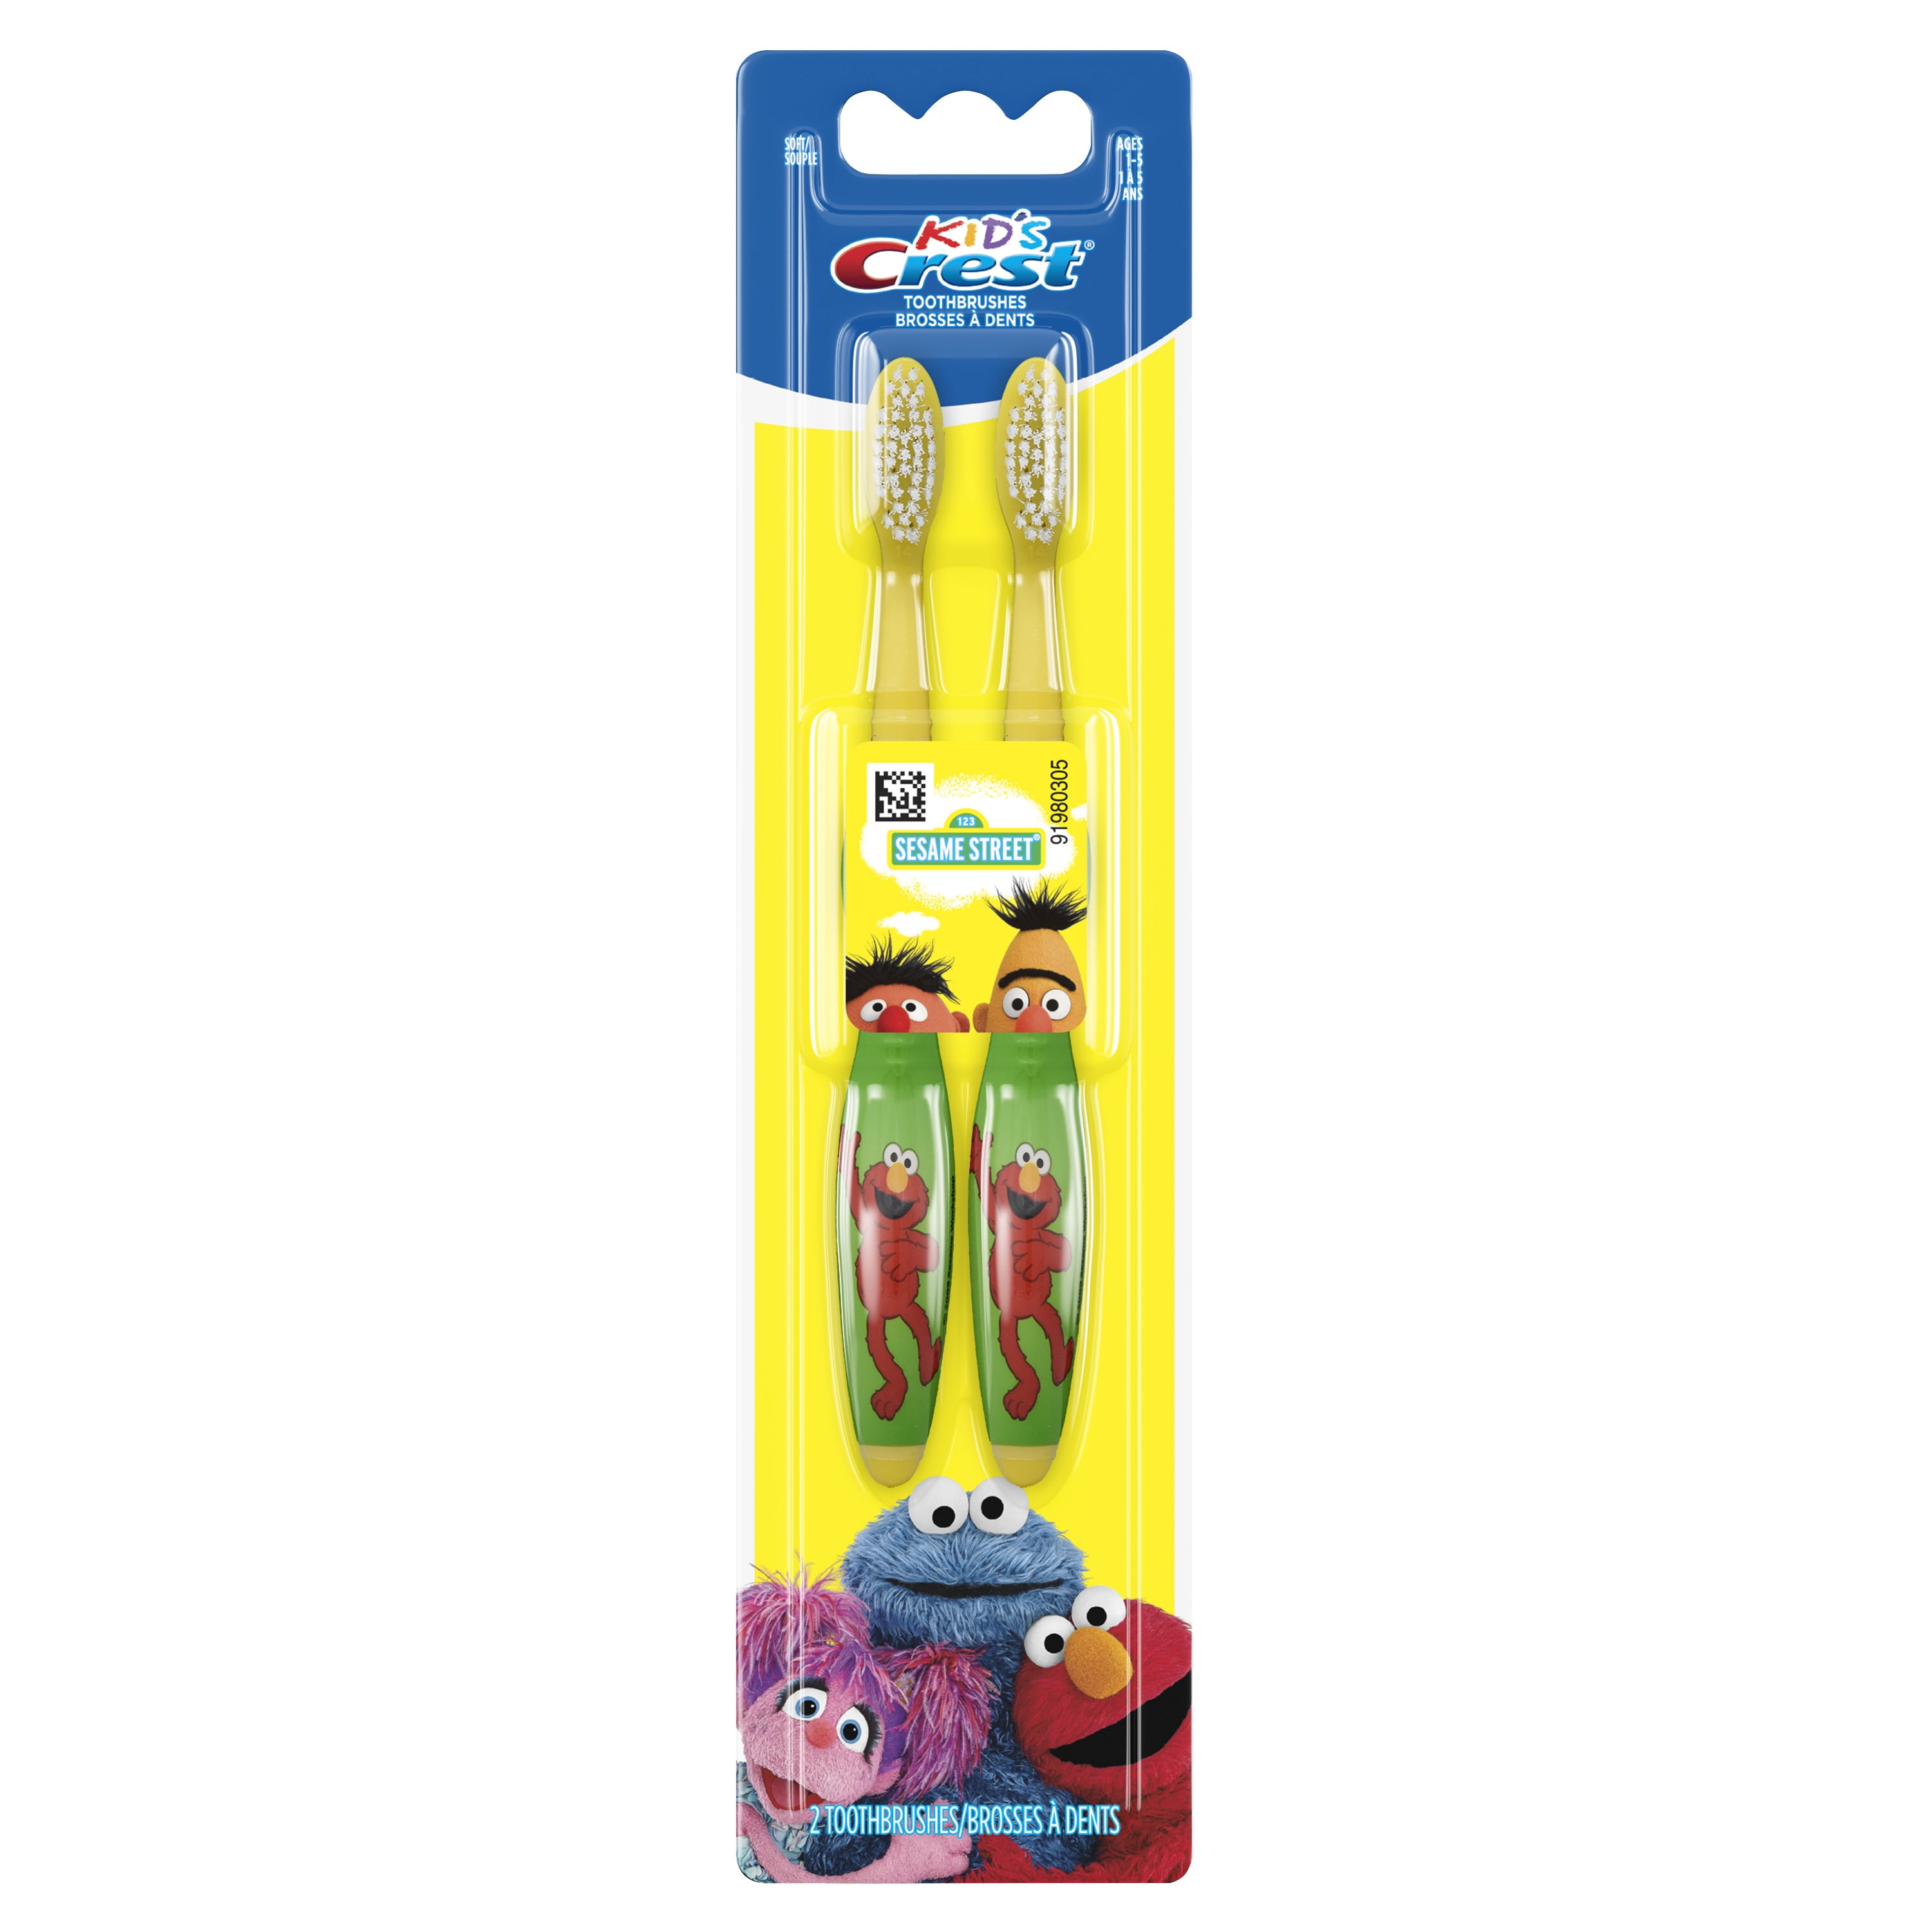 Crest Kids Soft Toothbrush featuring Sesame Street for Ages 2+, 2 Pack -  Walmart.com